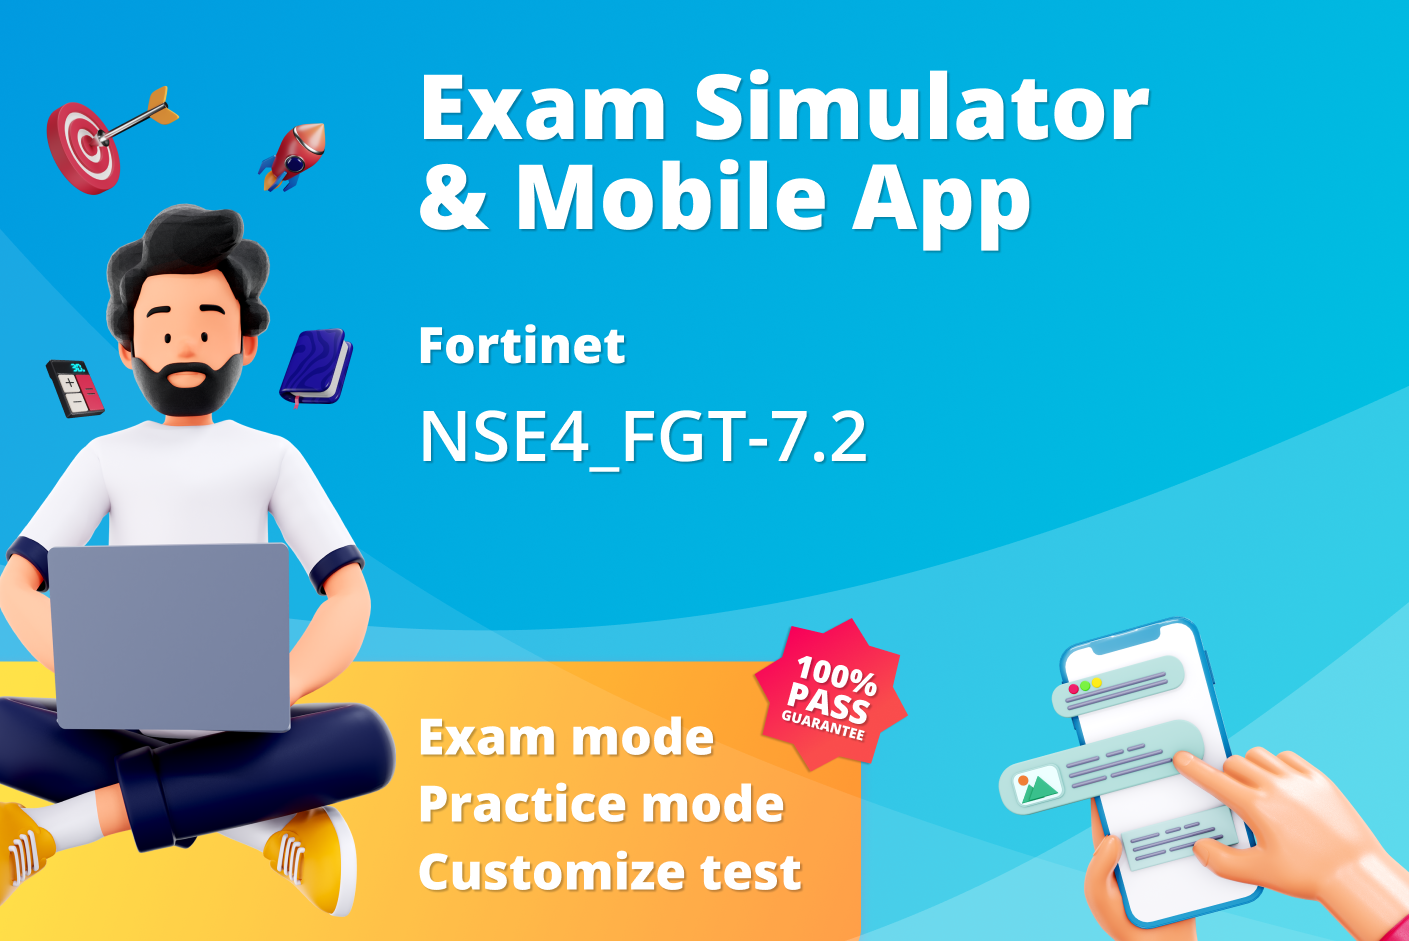 This guide is related to Fortinet NSE 4 exam questions